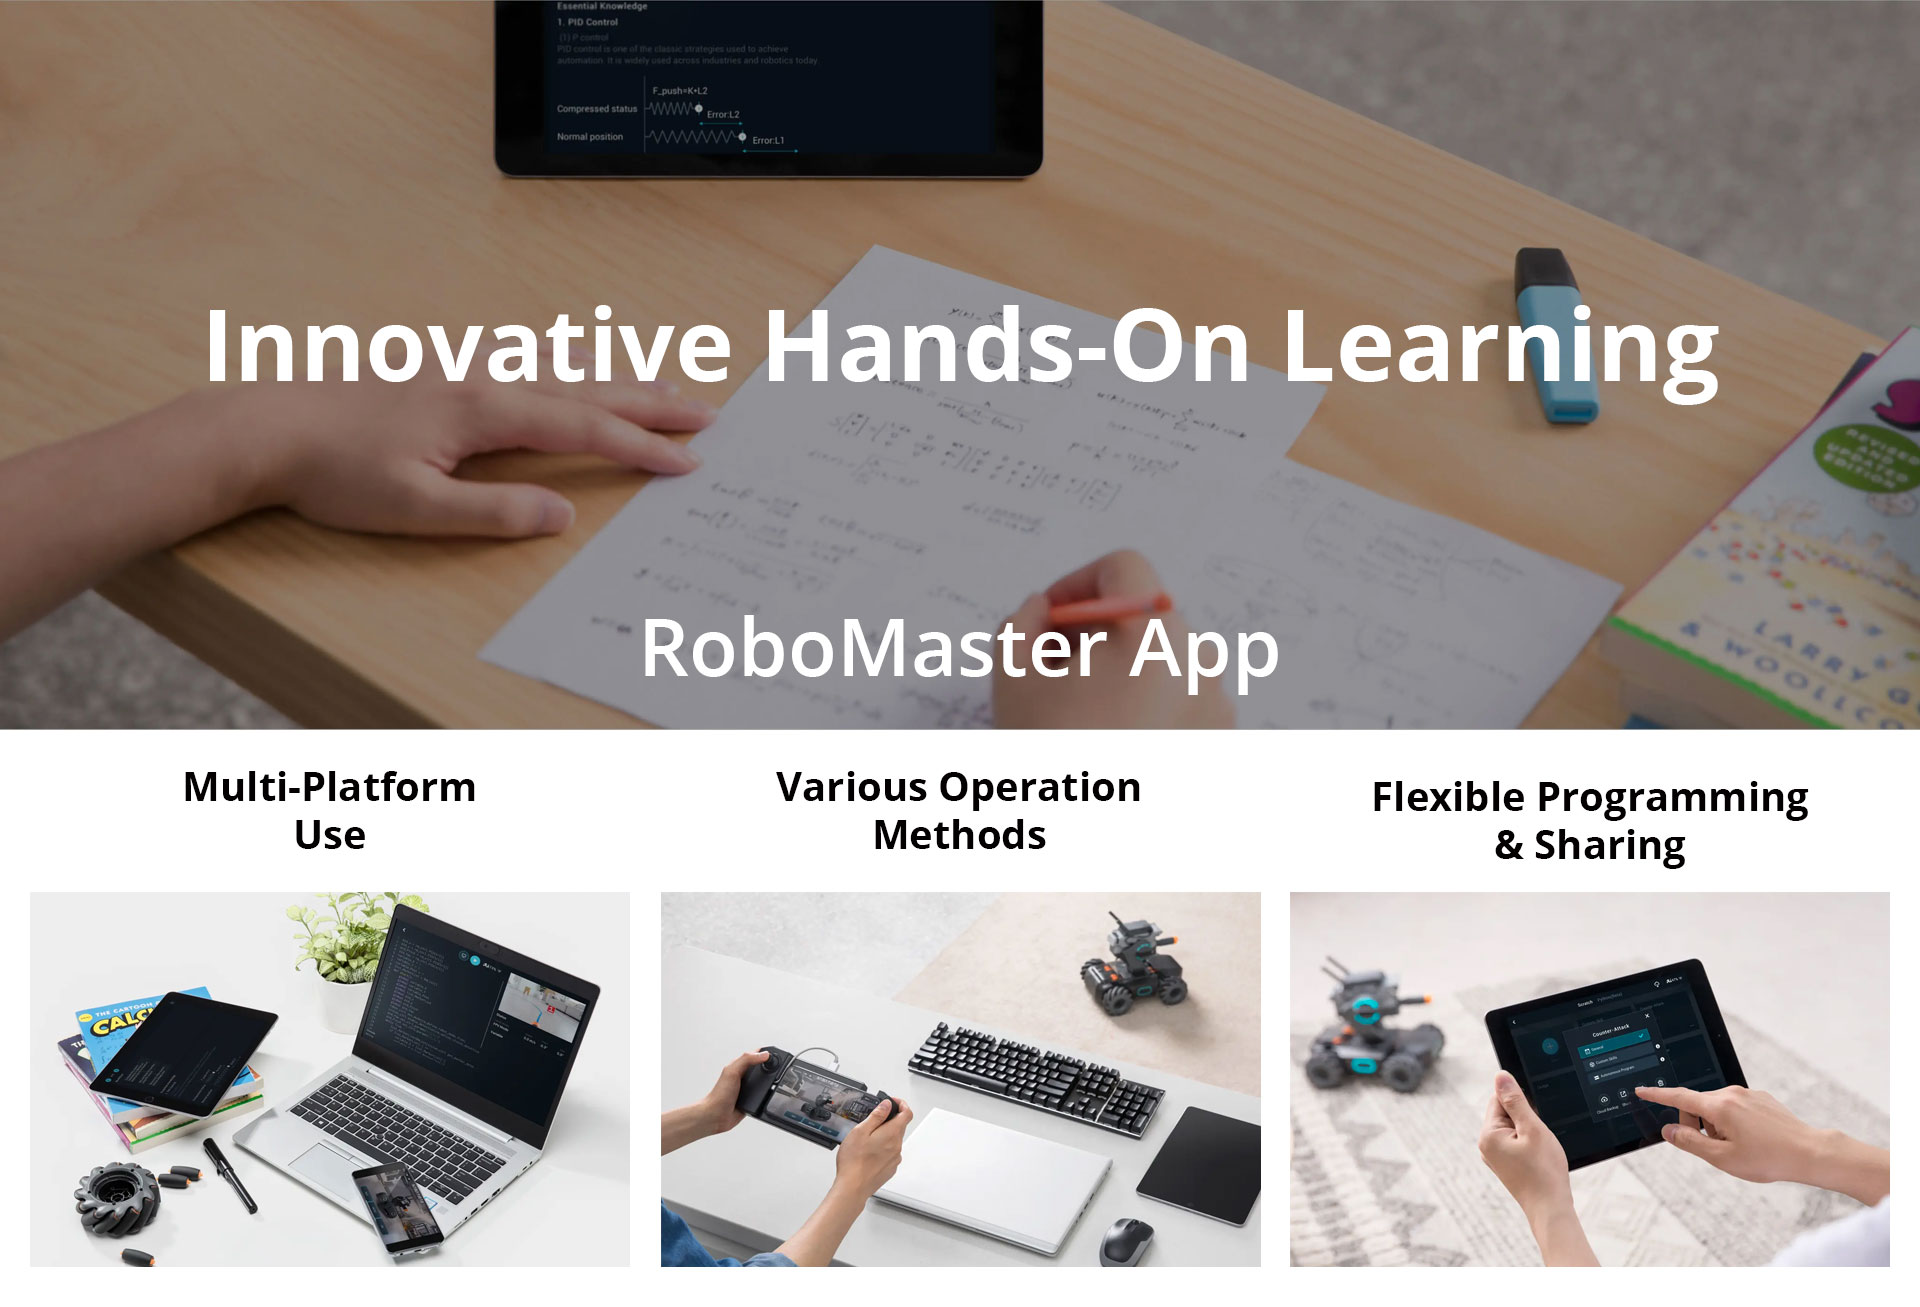 DJI RoboMaster S1 Innovative Hands-On Learning and App